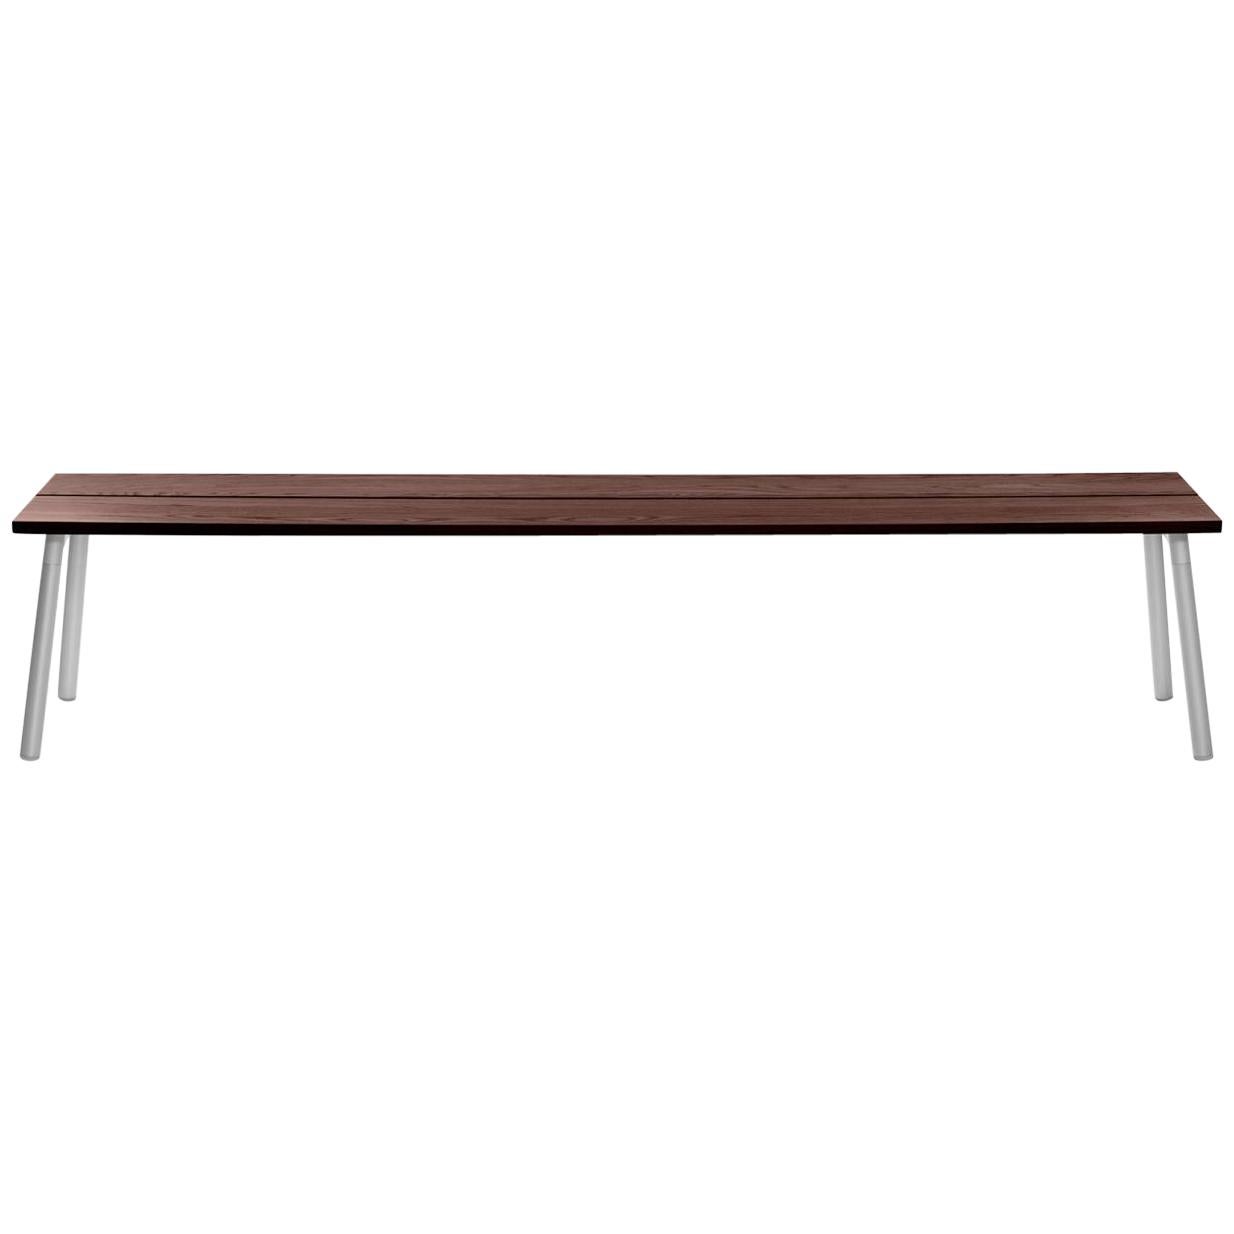 Emeco Run 4-Seat Bench in Aluminum and Walnut by Sam Hecht & Kim Colin